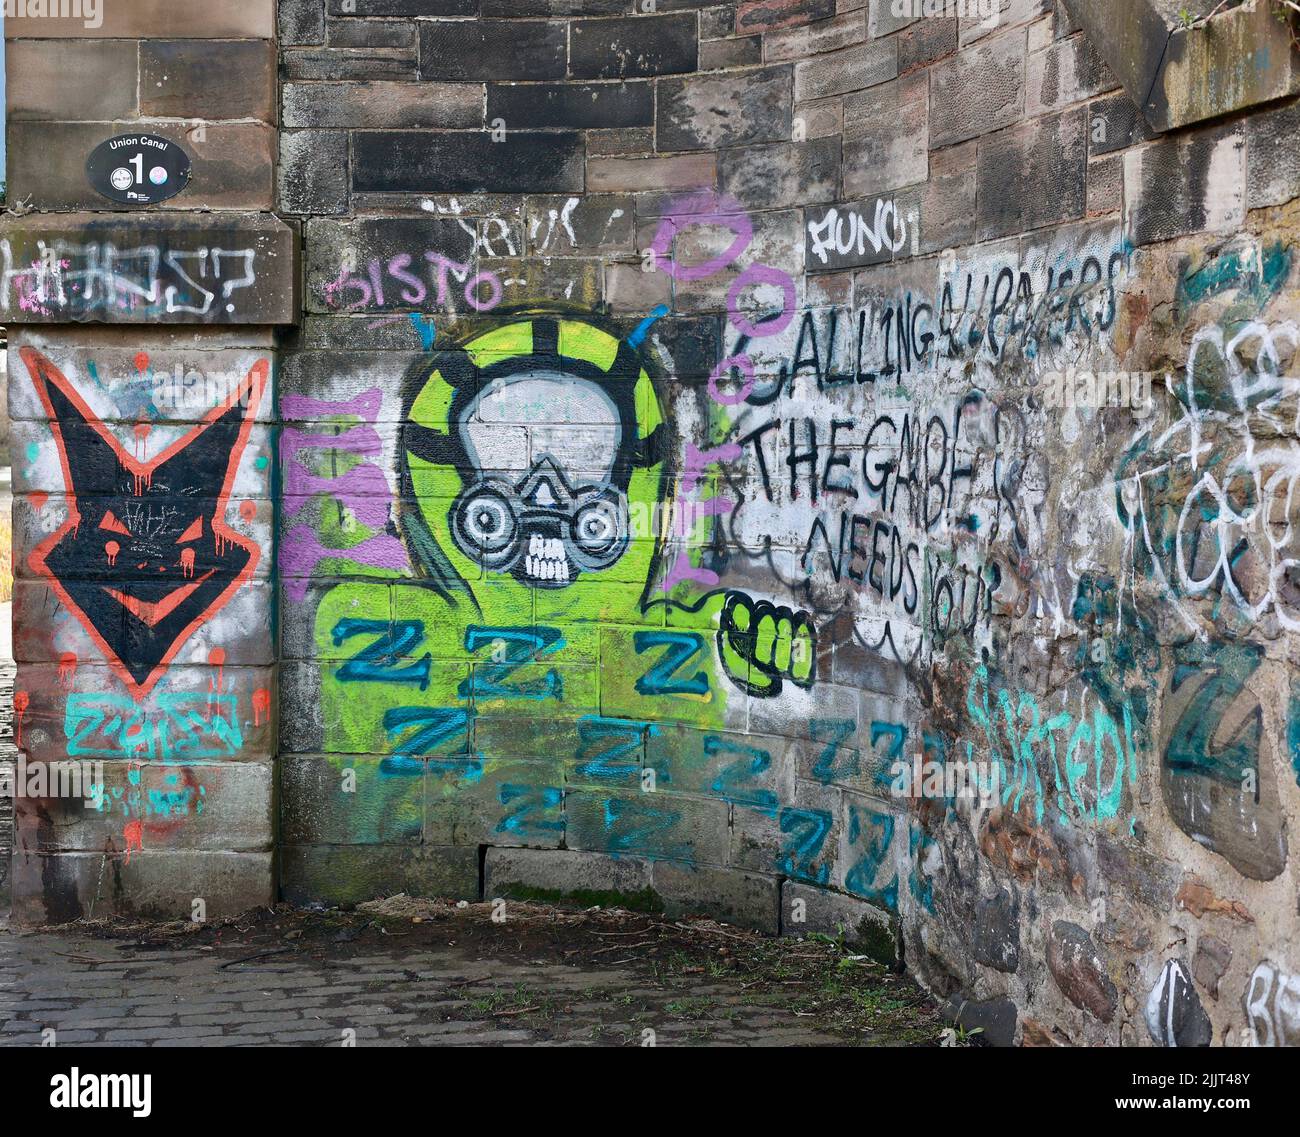 Colorful graffiti on a stone wall along the canal path in Edinburgh Stock Photo